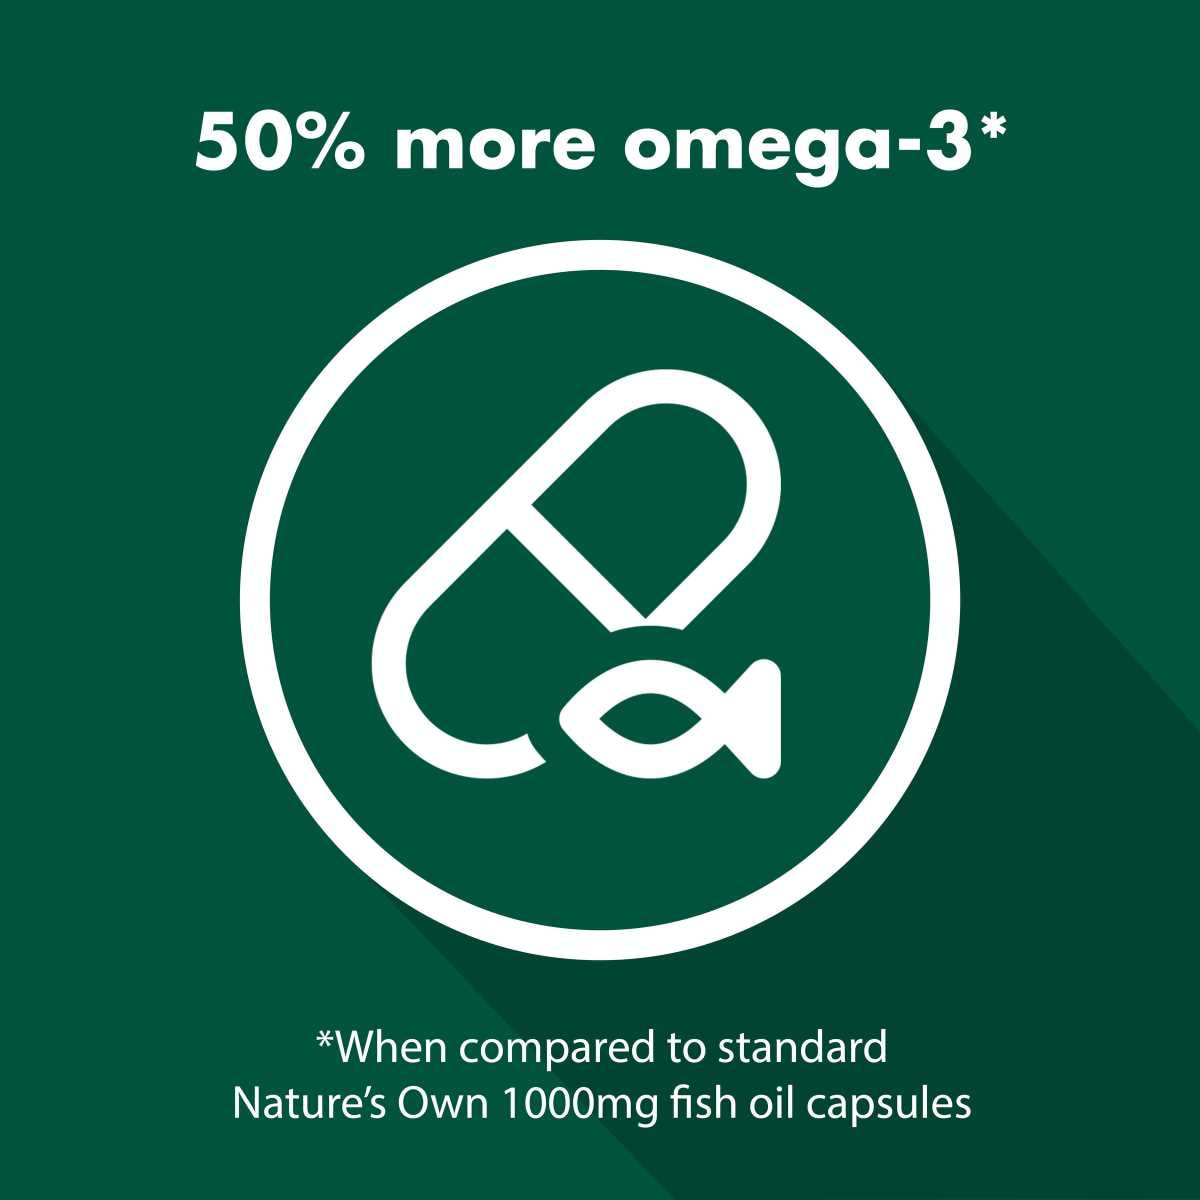 Natures Own Odourless Fish Oil 1500mg 200 Capsules